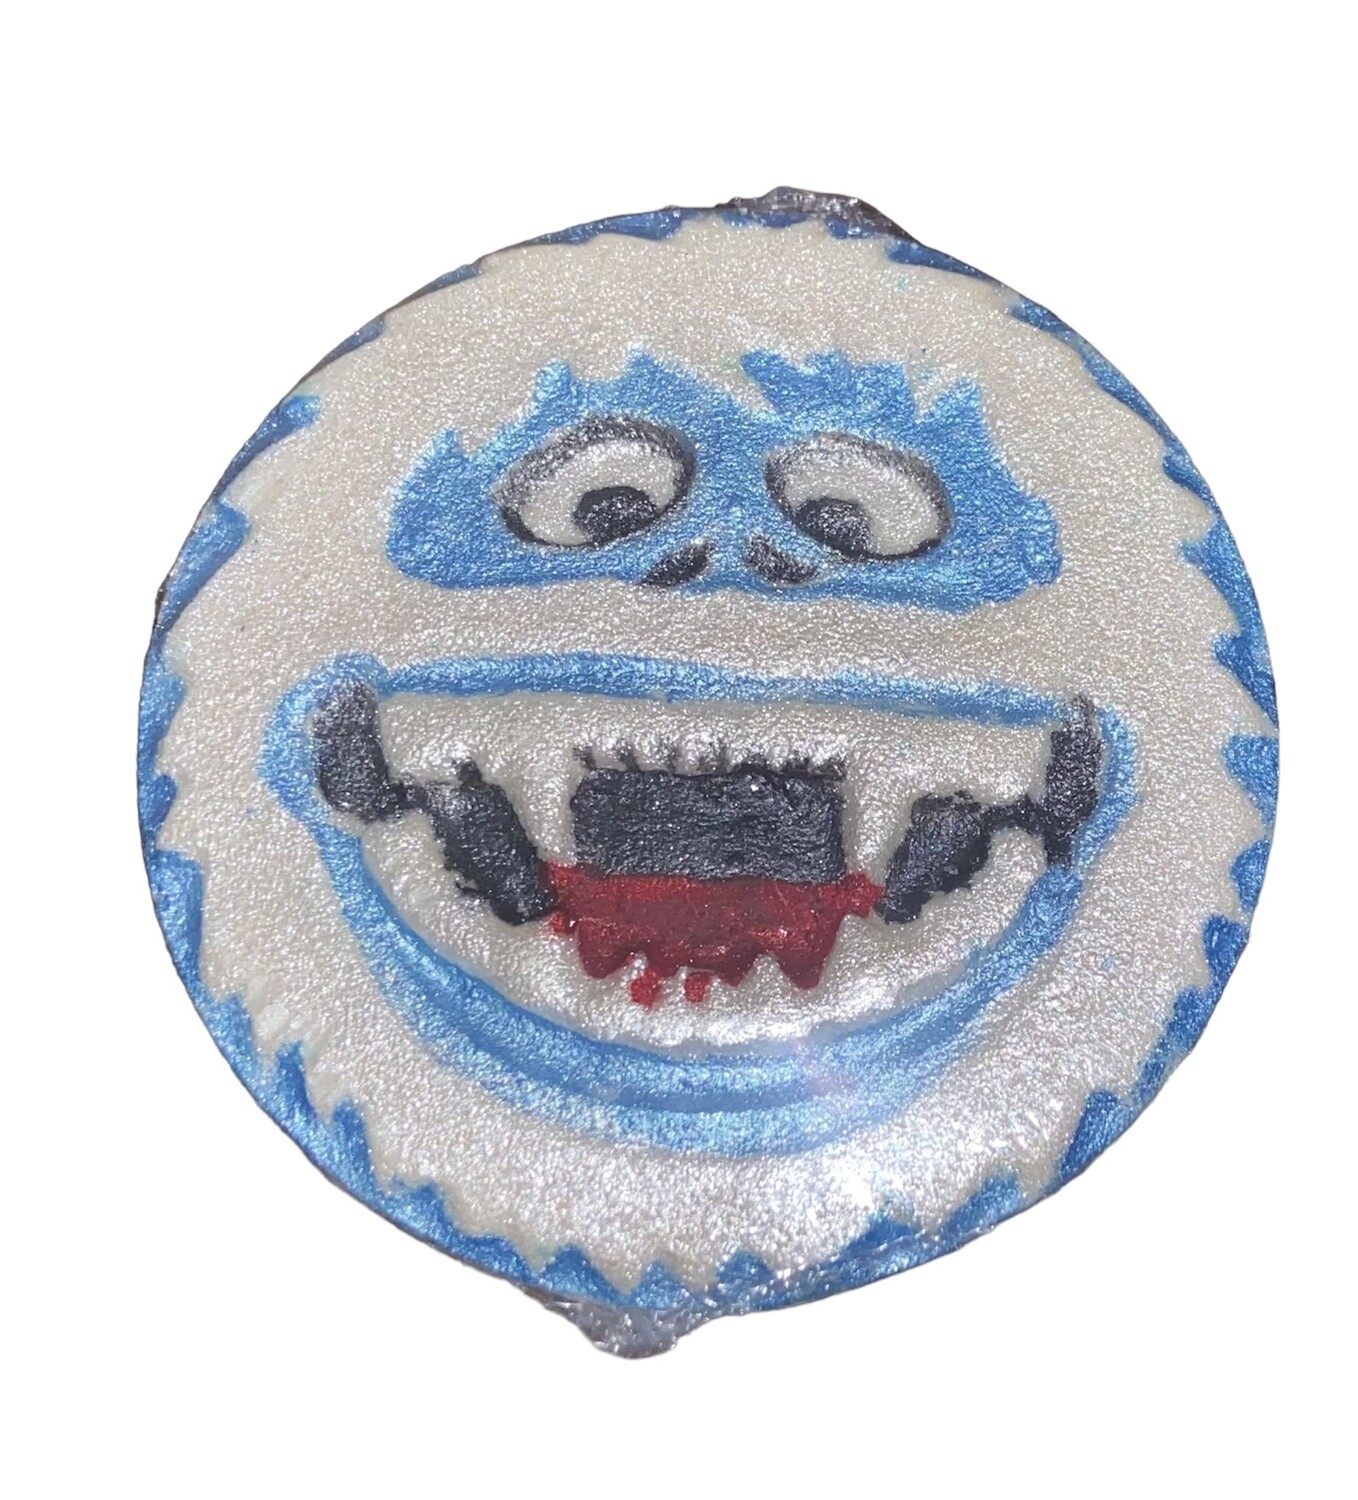 Abominable Snowman Hand Painted Bath Bomb